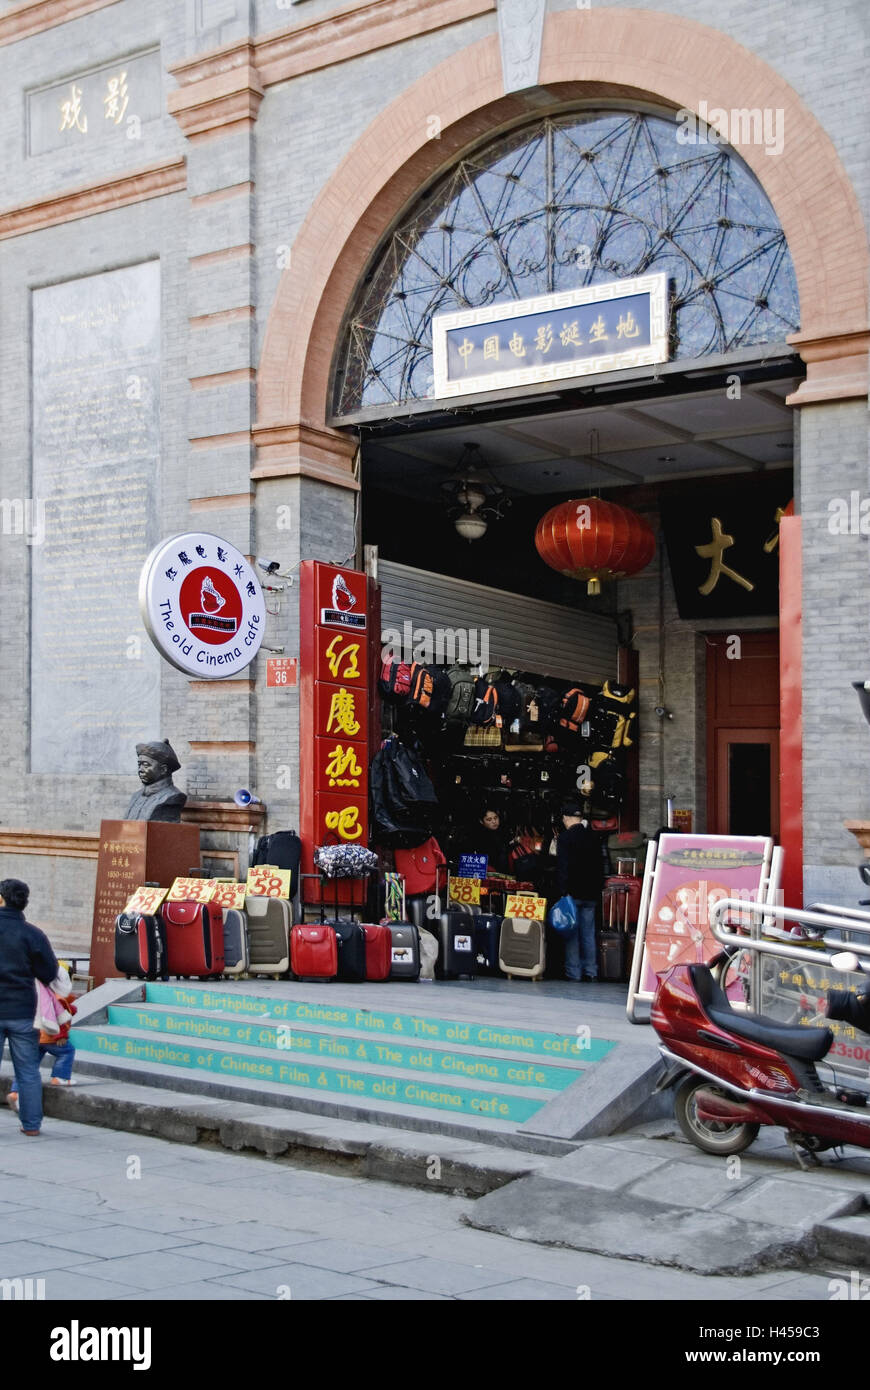 China, Peking, Old Town, Hutongviertel, building, input, business, Asia, town, capital, destination, architecture, signs, figure font, lampion, suitcase, suitcase business, sales, passer-by, person, outside, Stock Photo